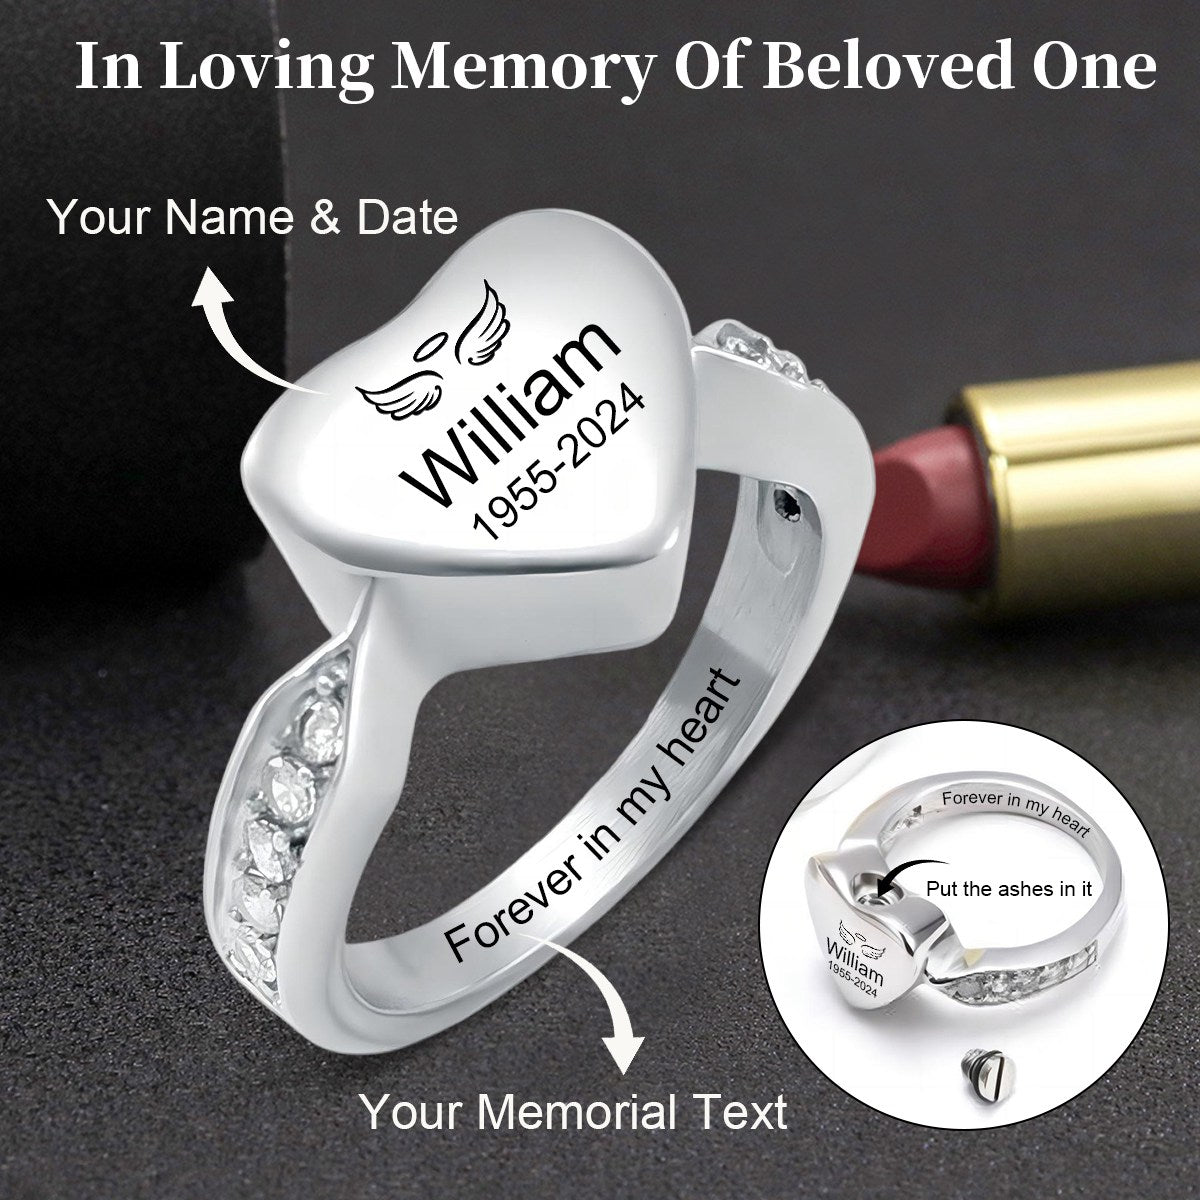 Personalized Stainless Steel Memorial Heart Urn Ring